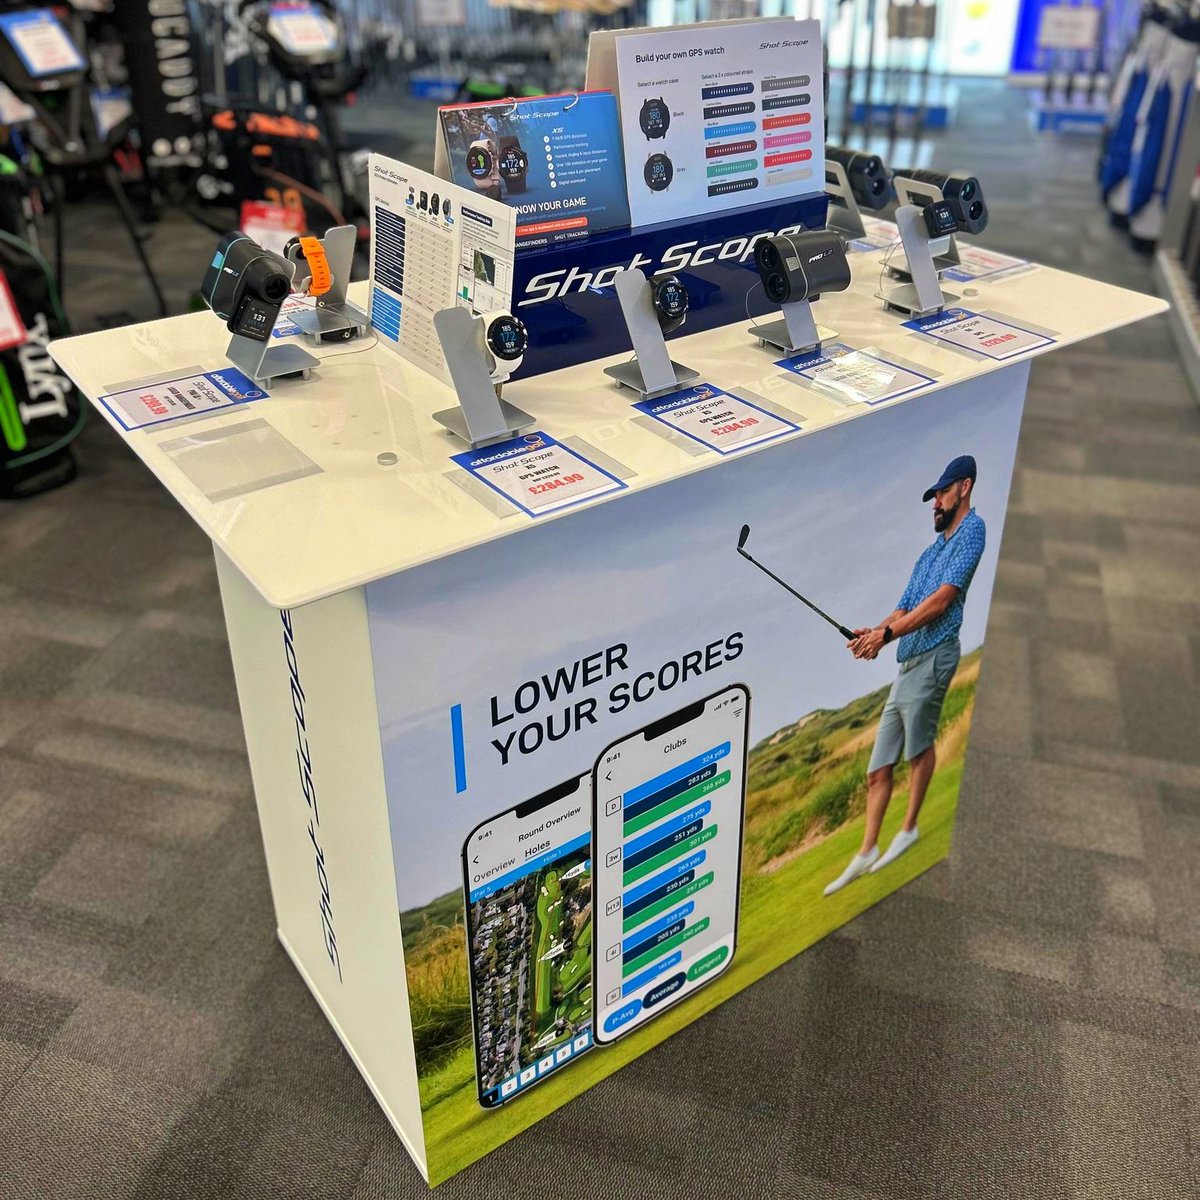 Shot Scope Glow Up 🔥 Our Hillington store took delivery of a brand new Shot Scope display unit today - we think it looks pretty smart! Now you can get hands on with all the latest models from Shot Scope; including the latest G5 GPS Watch! Visit us in-store today and try them!